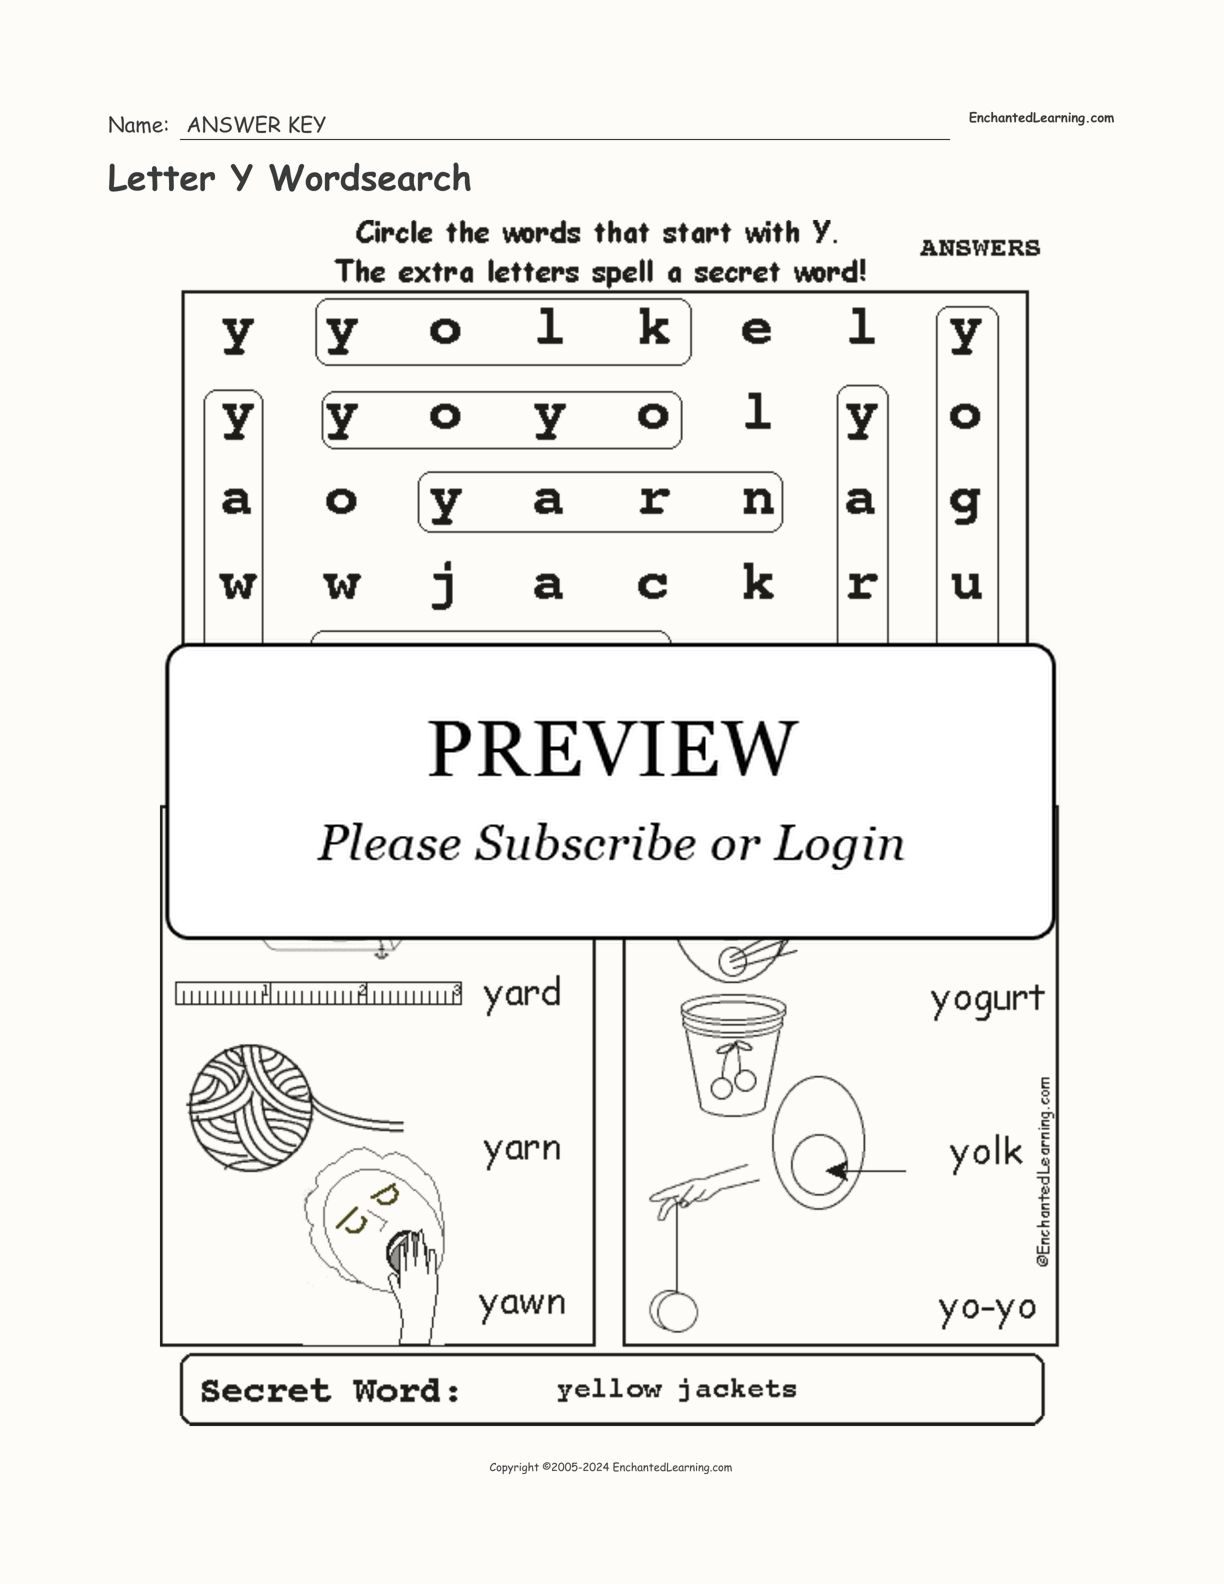 Letter Y Wordsearch interactive worksheet page 2